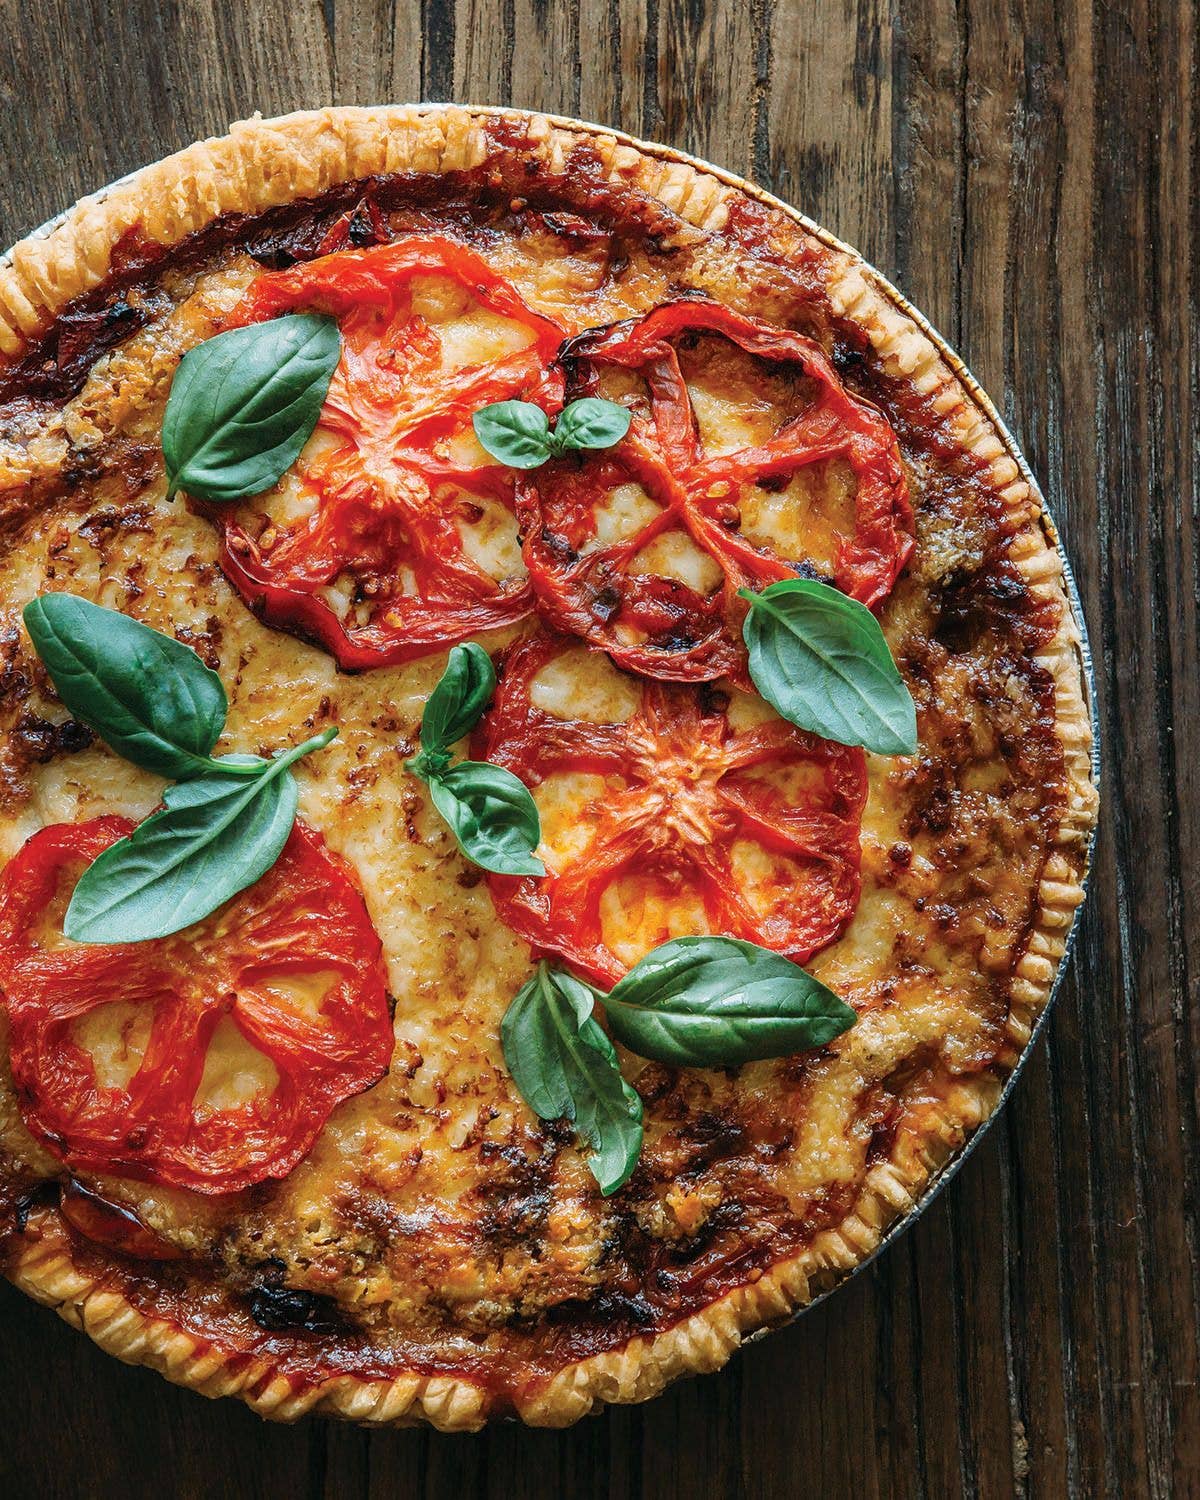 Watch Chef Vivian Howard Bake the Ultimate Southern Tomato Pie